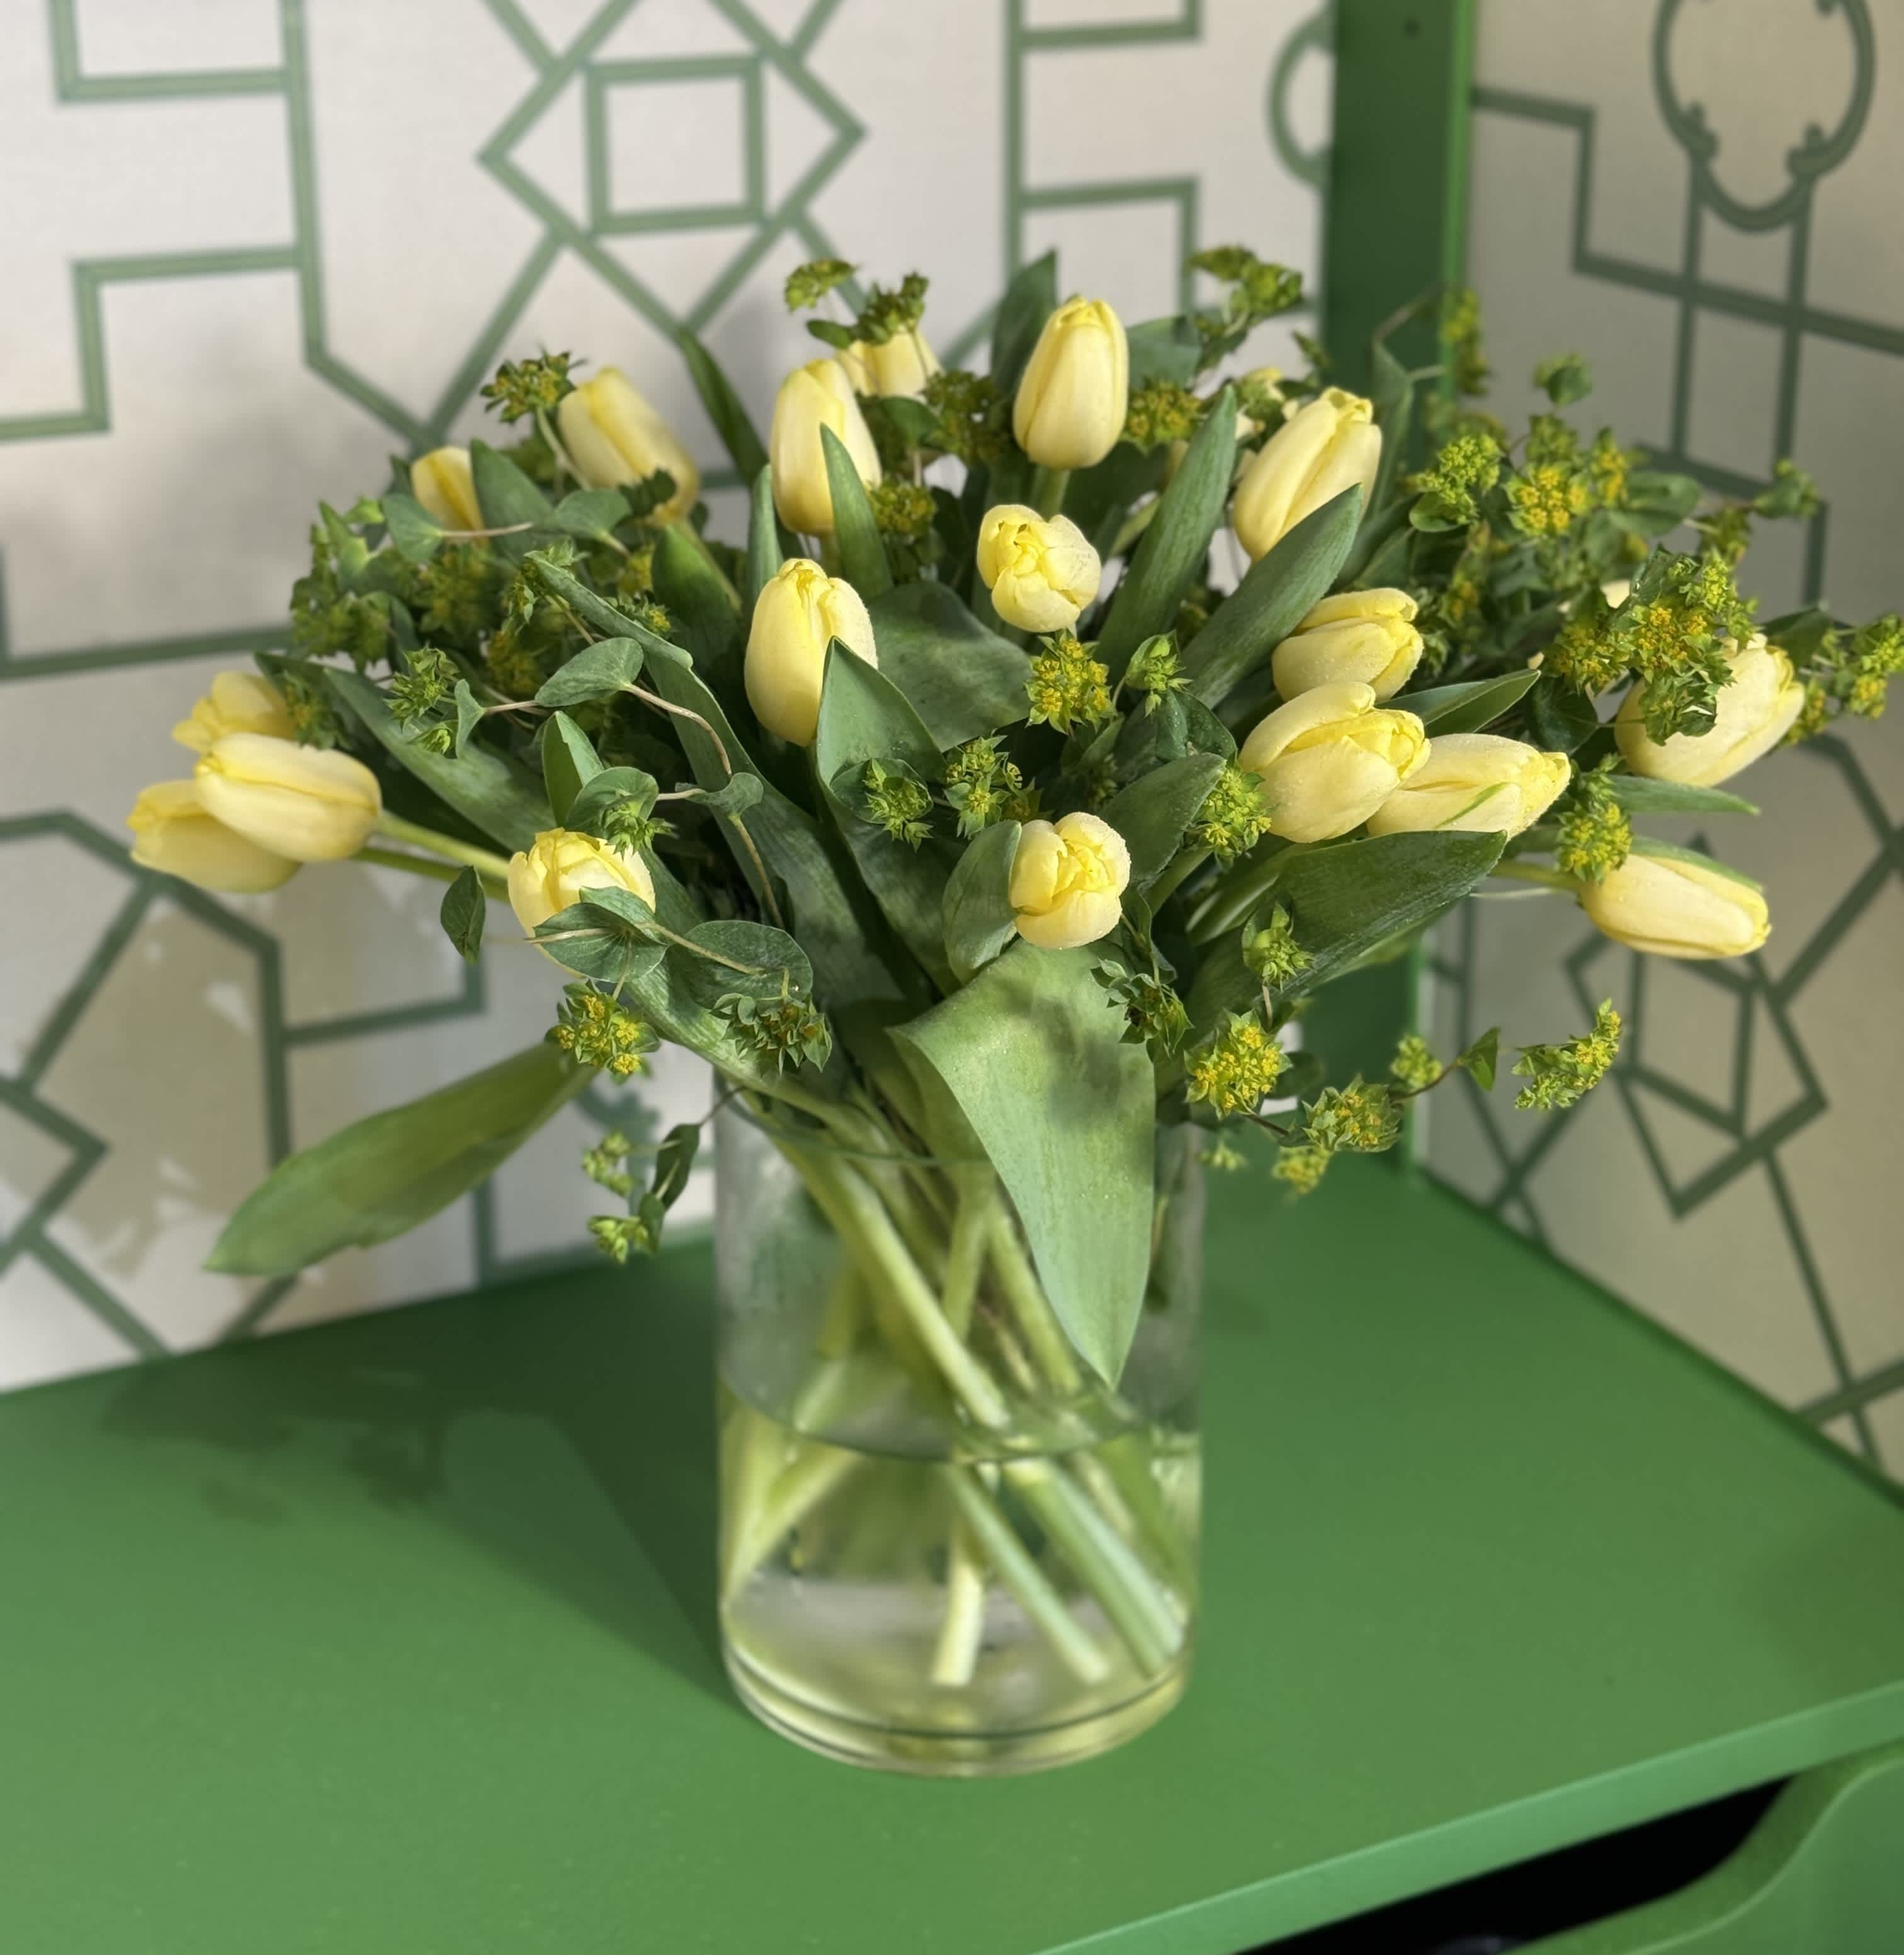 Mellow Yellow - An elegant vase arrangement filled with 20 yellow tulips imported from Holland.   *Shade of yellow may vary* *Deluxe price includes 40 yellow tulips*  At Belden's Florist we stand behind the quality of our products. We guarantee that our flowers will remain fresh and beautiful for 3-5 days after delivery. As cut flowers, they may naturally start to wilt beyond this timeframe. However, we ensure that you receive the freshest blooms possible, carefully selected and expertly arranged to bring joy and elegance to your space. To help your flowers stay fresher longer, we recommend adding fresh water to the vase regularly. Just like you, flowers need hydration to thrive, and refreshing the water allows them to drink up and continue to dazzle you with their beauty.